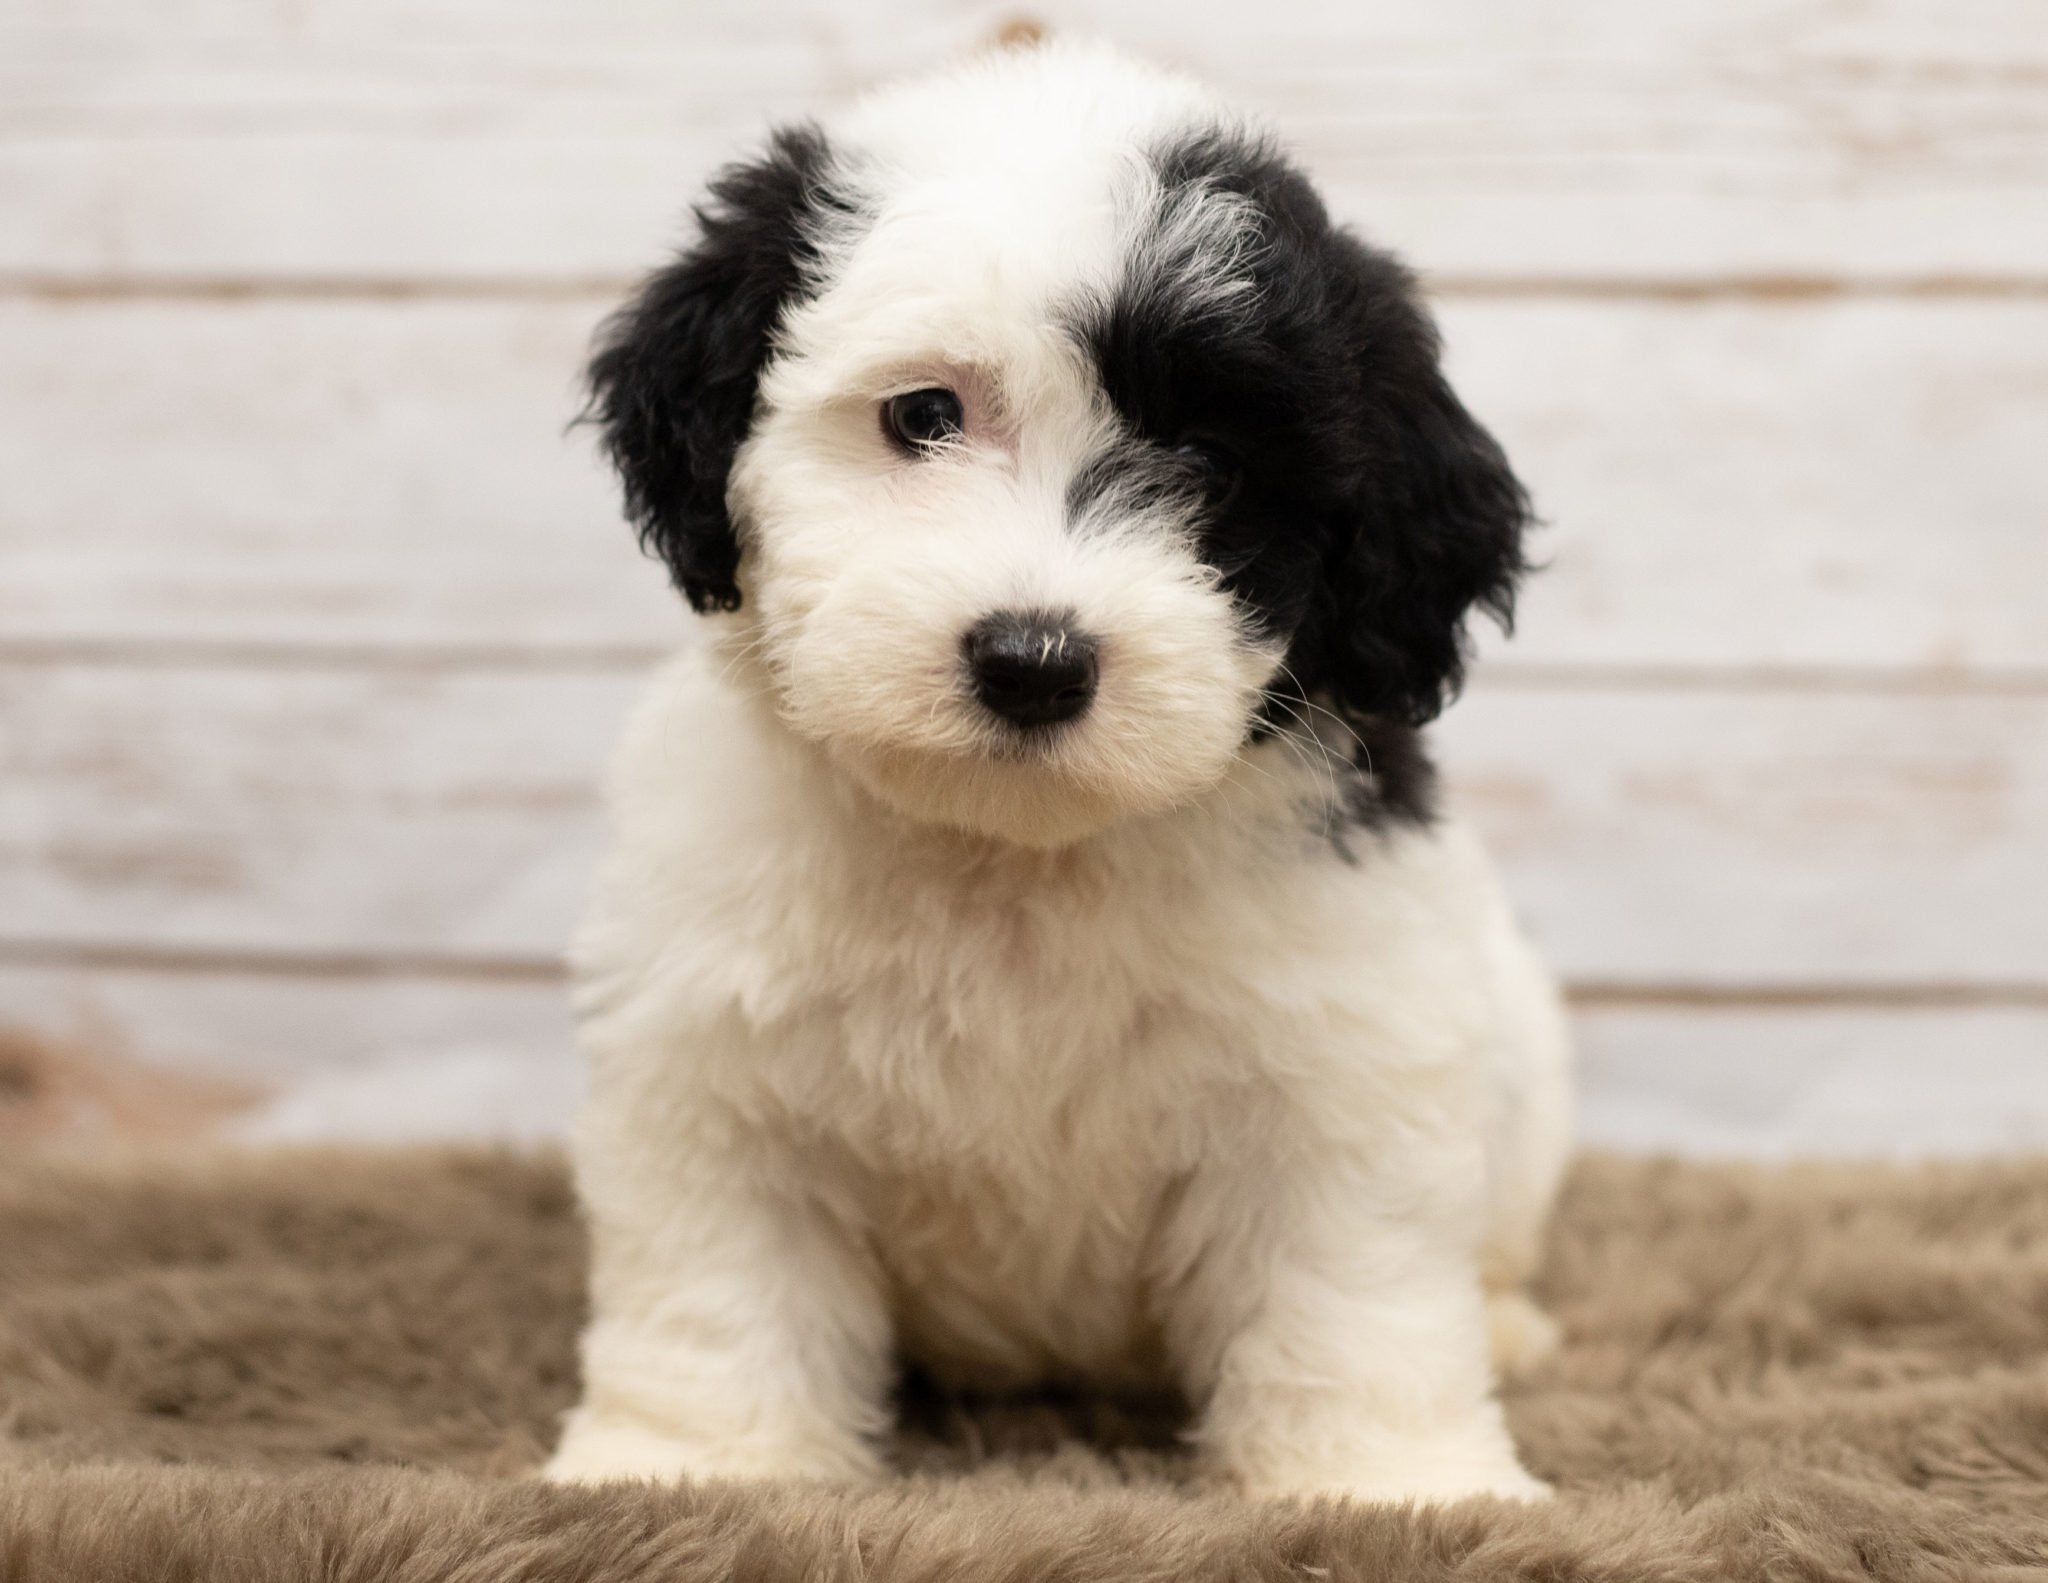 A beautiful standard sheepadoodle puppy with a black mask on half the face